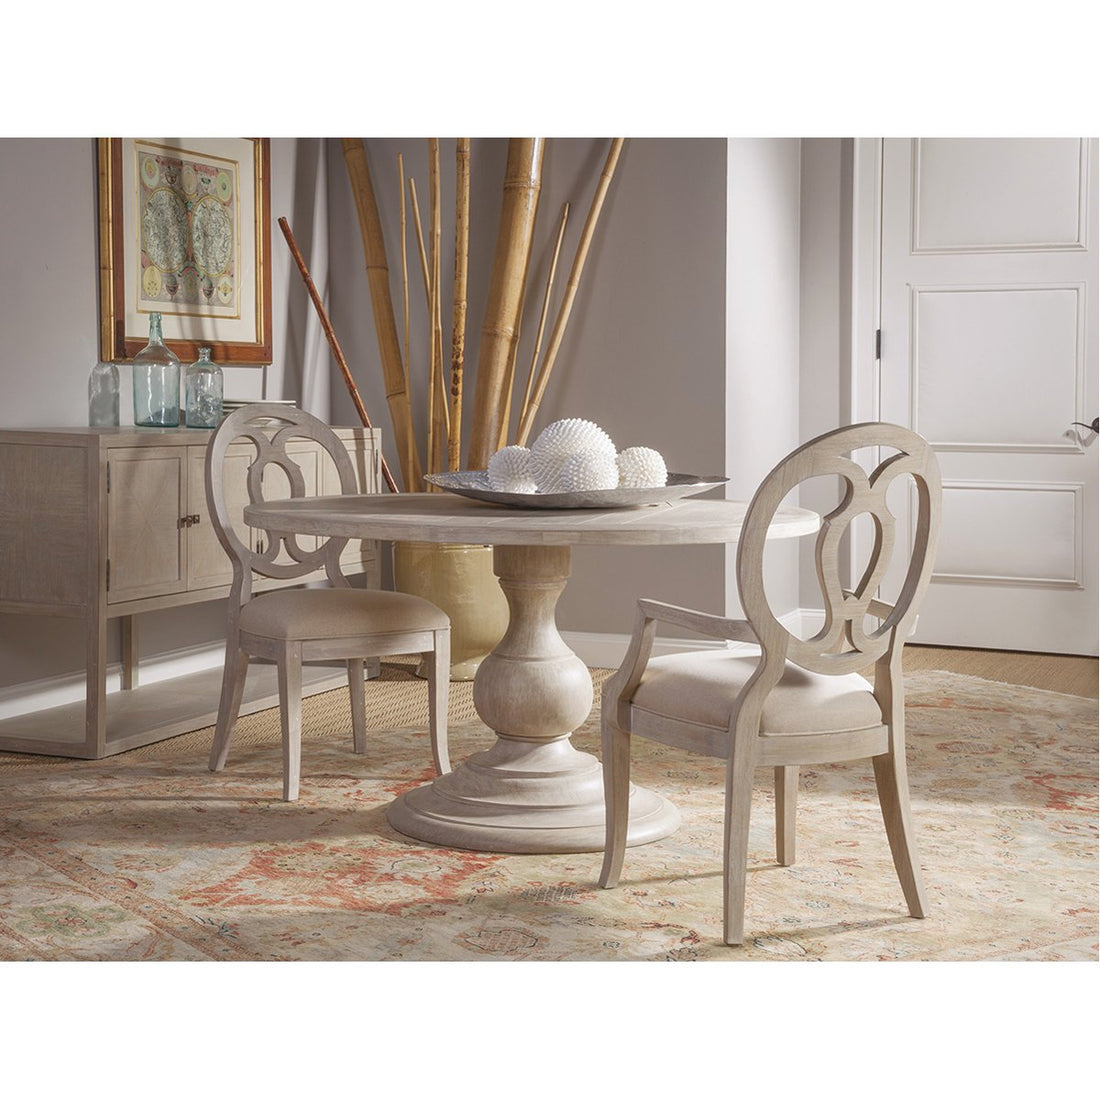 Artistica Home Cohesion Program Axiom Round Dining Table 2005-870C